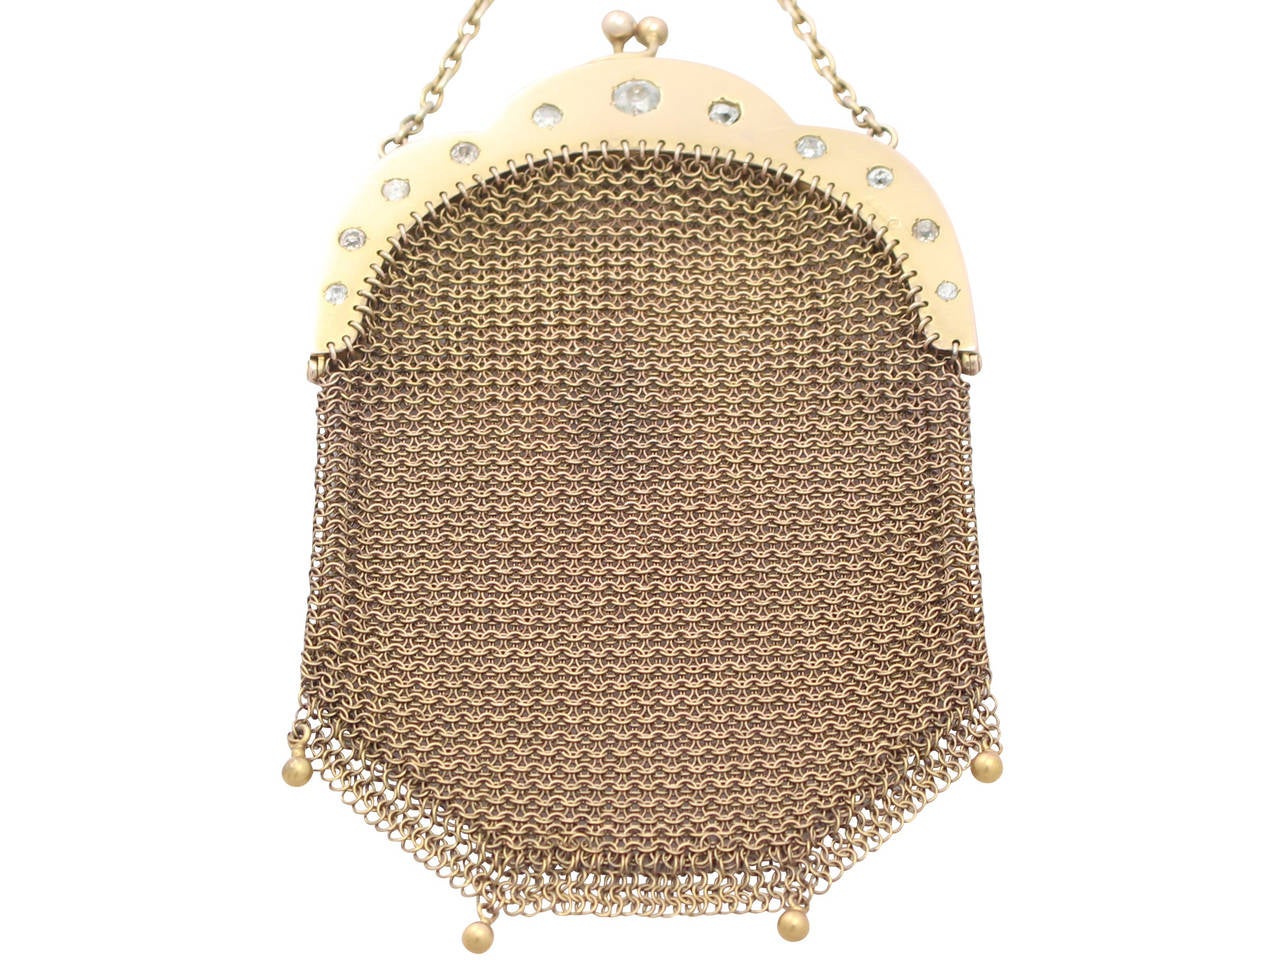 A fine and impressive, unusual antique Edwardian English 3.16 carat diamond set, 9 karat yellow gold chain mail ladies' purse; an addition to the diverse range of collectable items at 

This fine Edwardian mesh / chain mail purse has been crafted